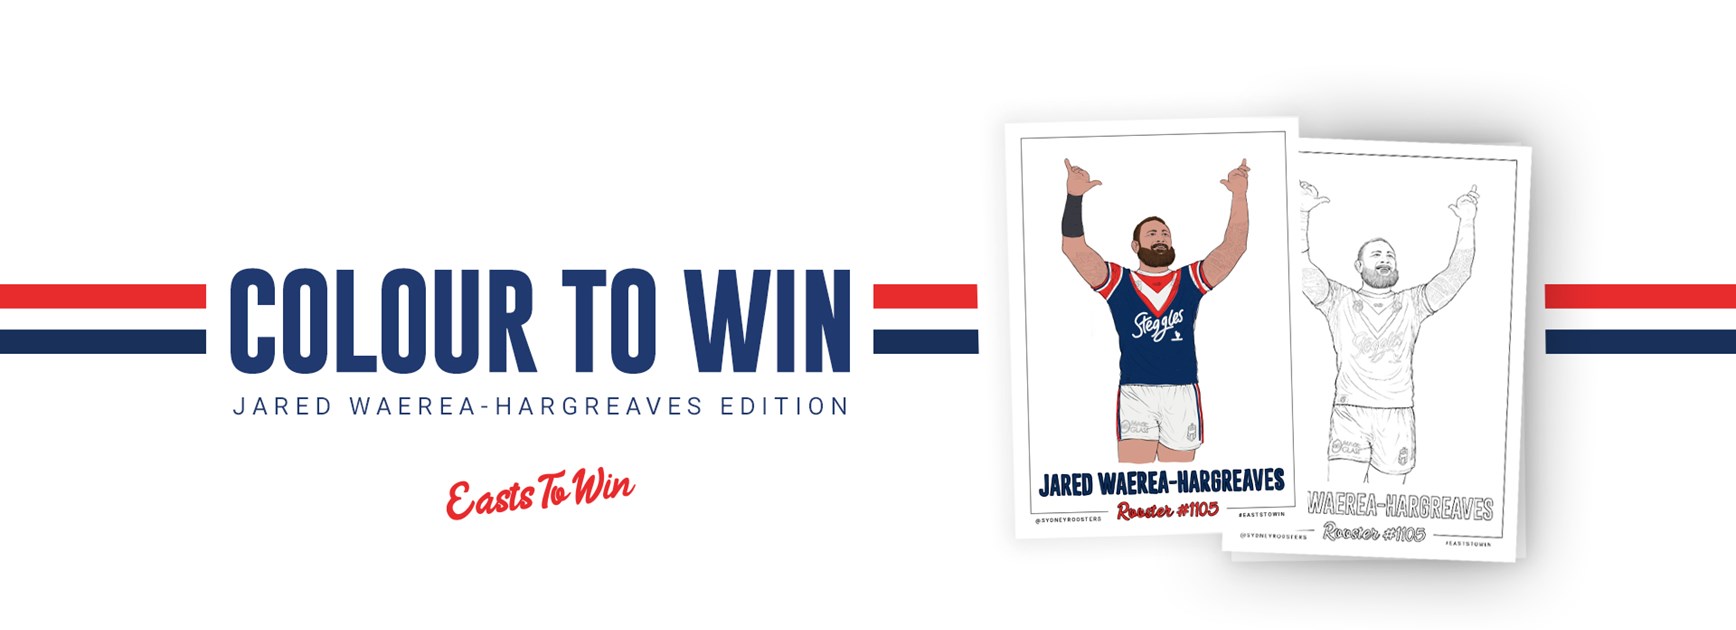 Colour in JWH for Your Chance to Win!